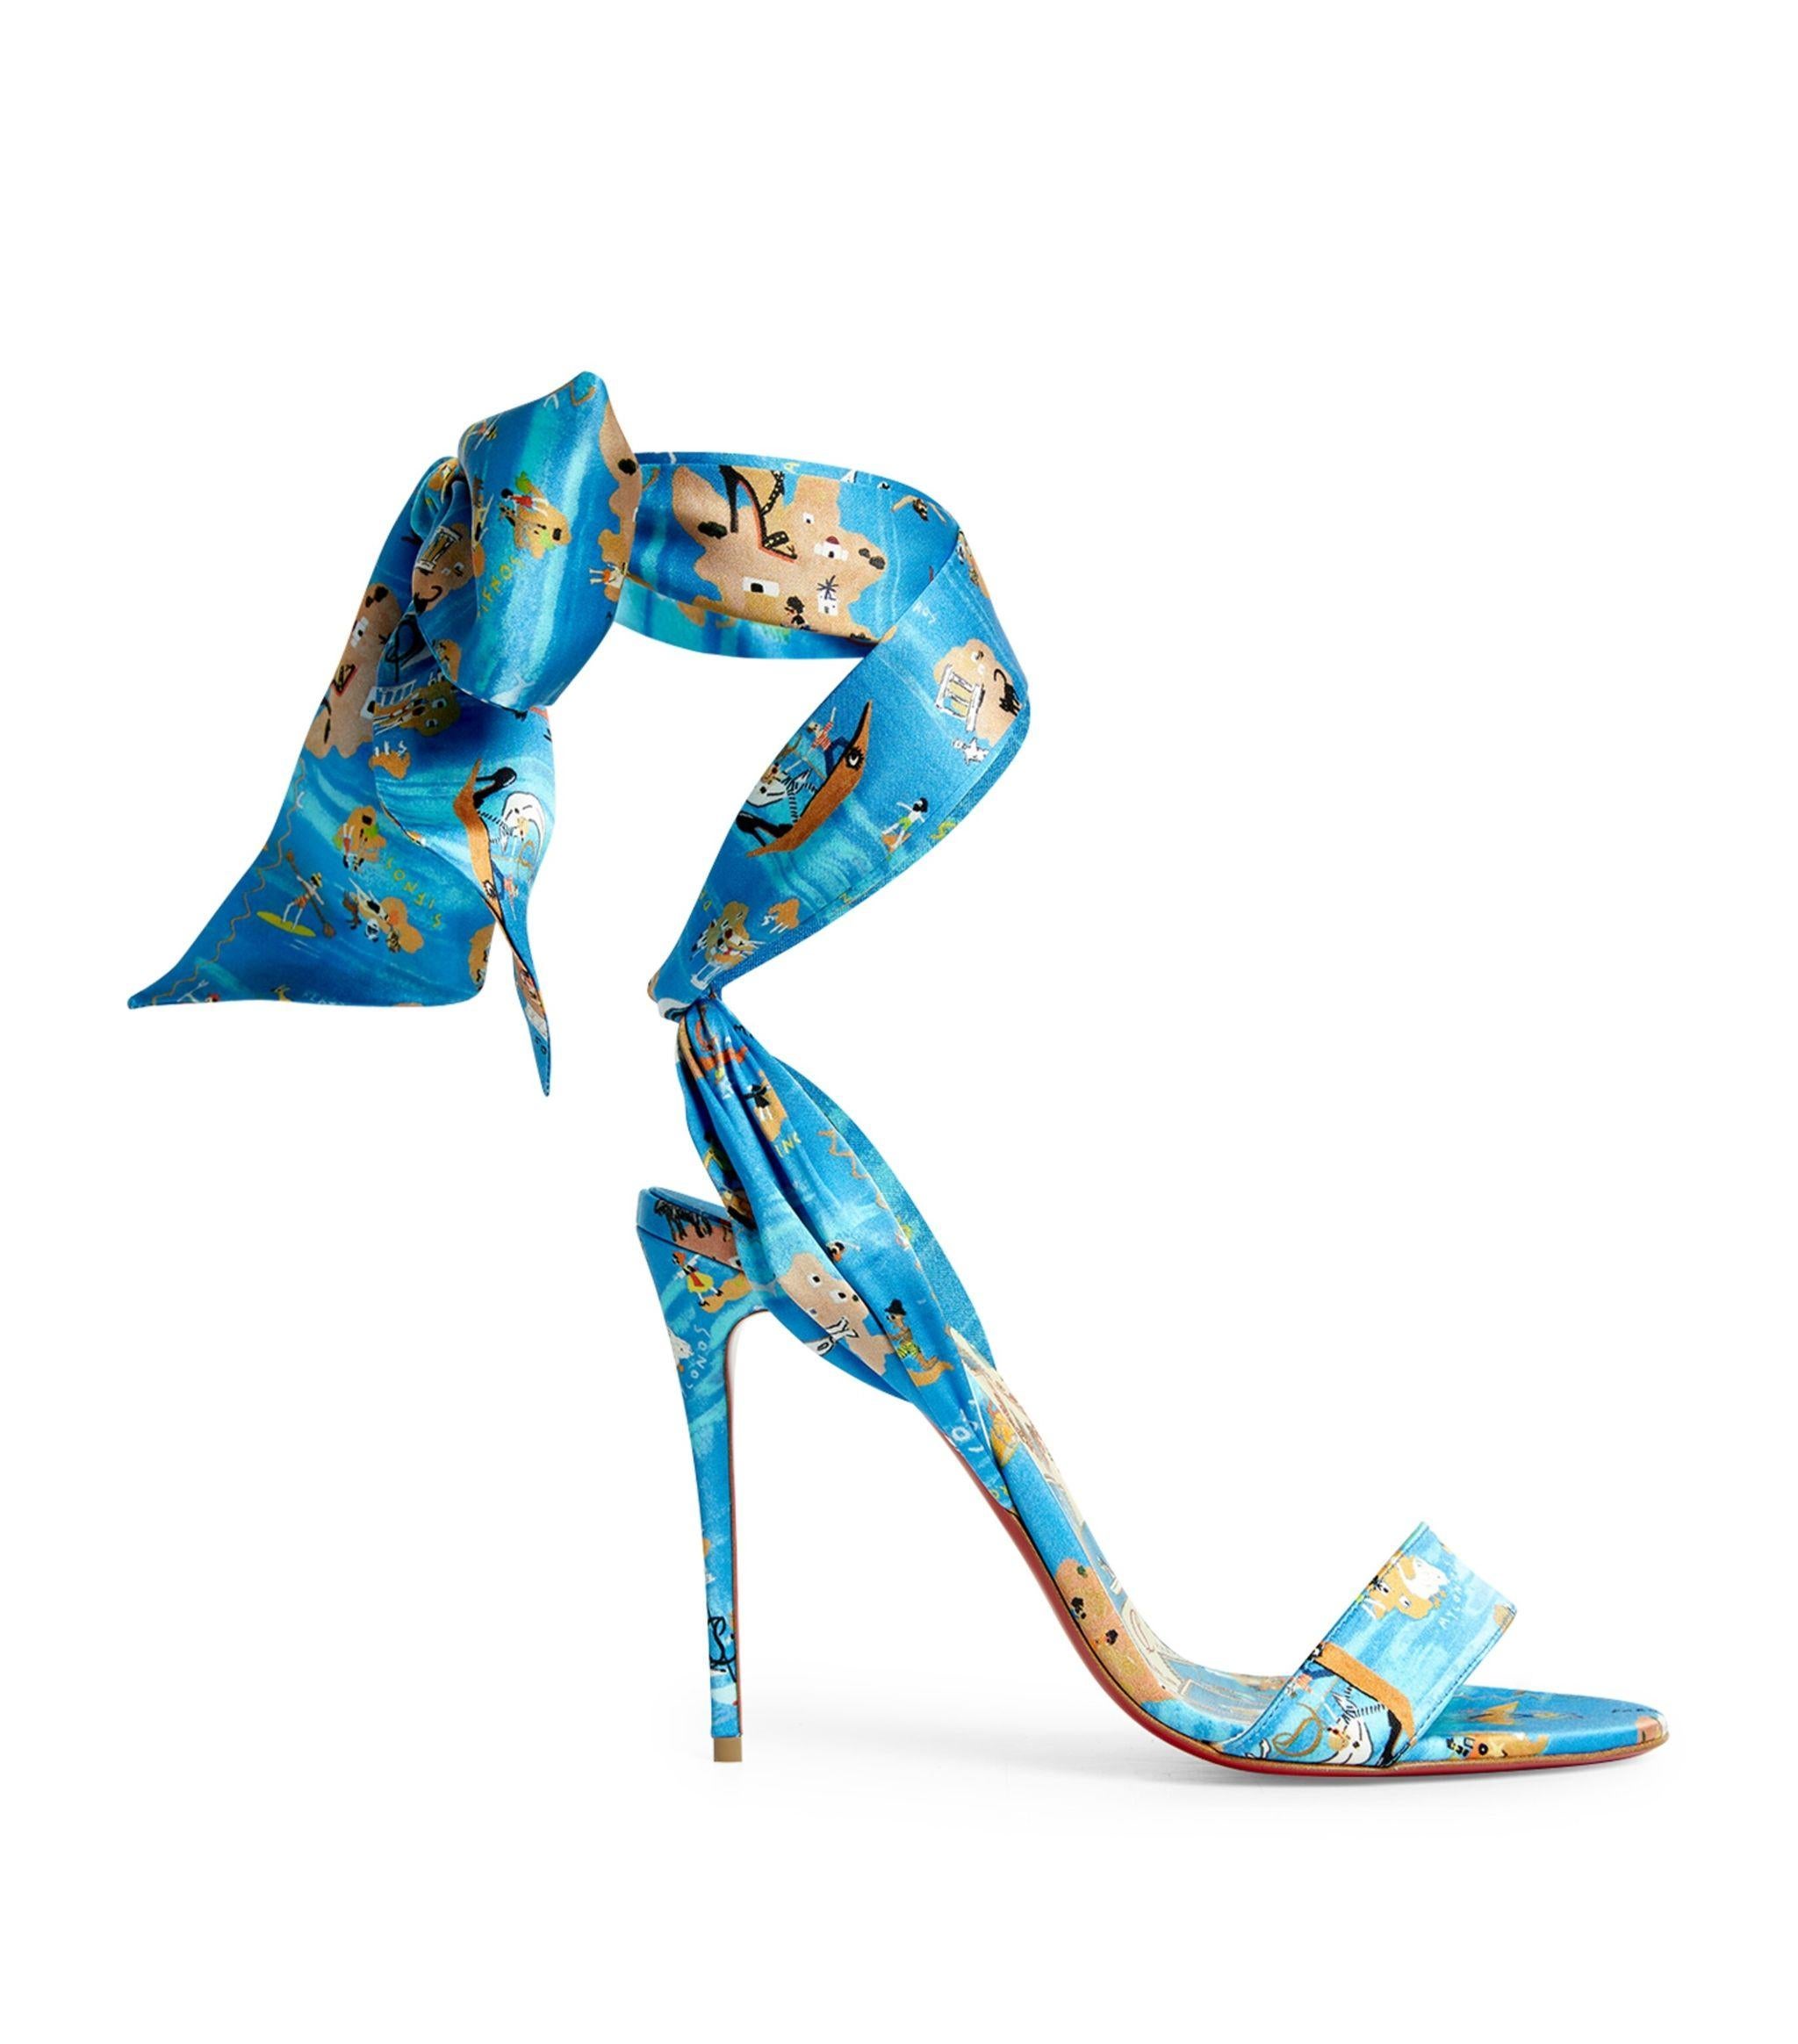 These chic stylish heels are crafted of Loubi Odyssey blue patterned crepe satin, inspired by the Greek islands. These have a 4-inch wrapped sharp stiletto, adjustable ribbon ankle ties and an open toe. Brand new, never worn. Comes in original